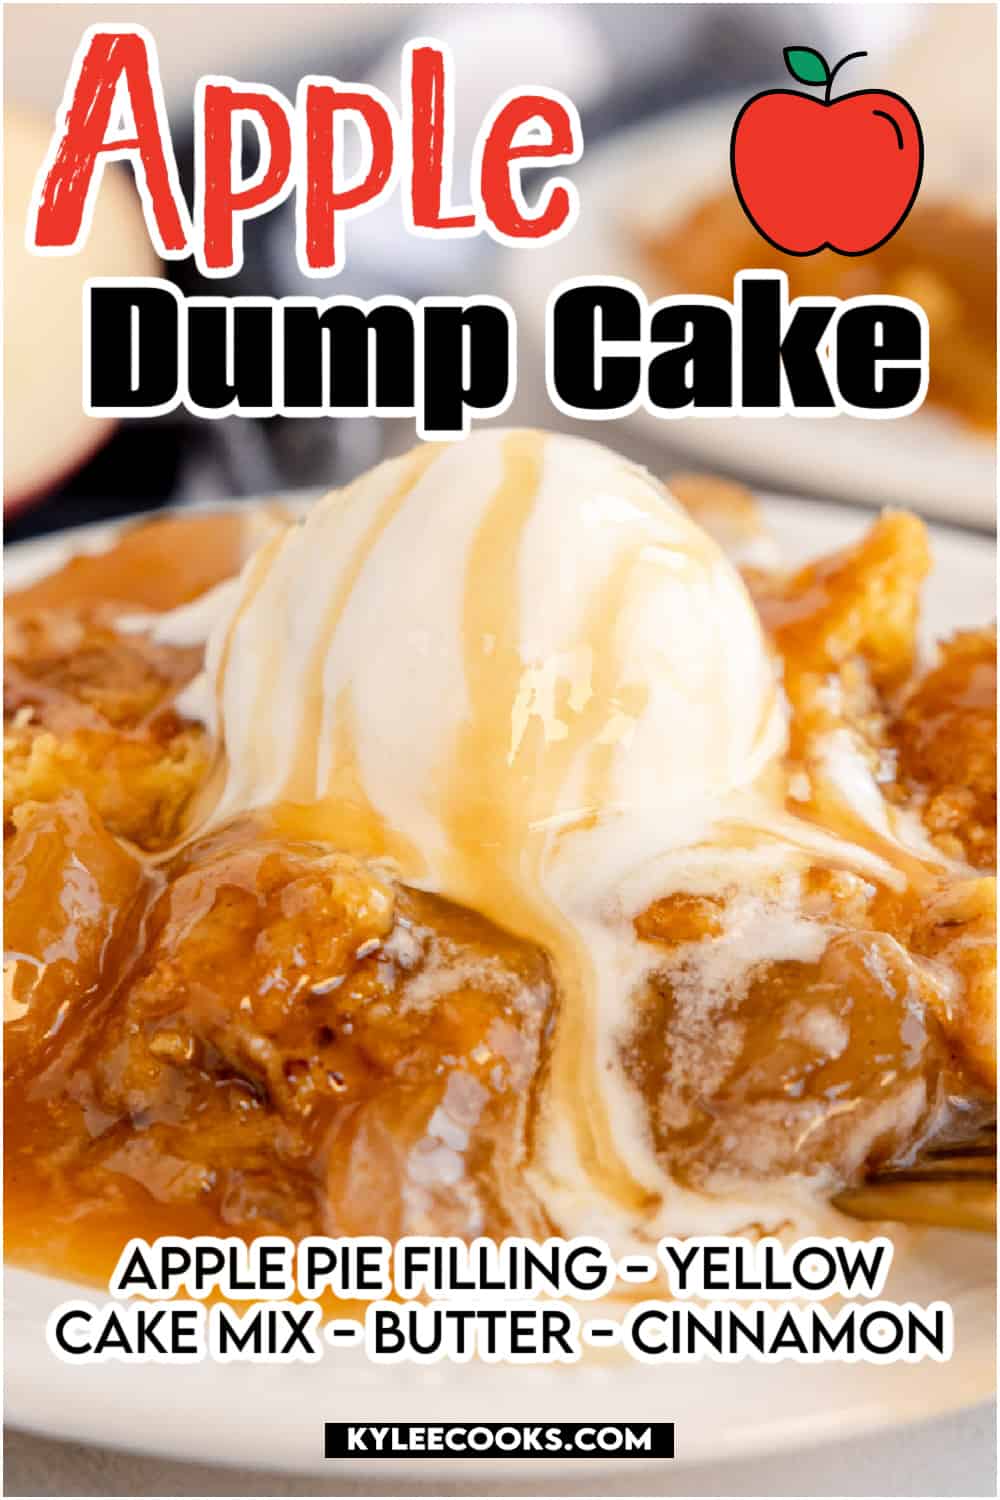 Apple dump cake with icecream on a plate with recipe name overlaid in text.